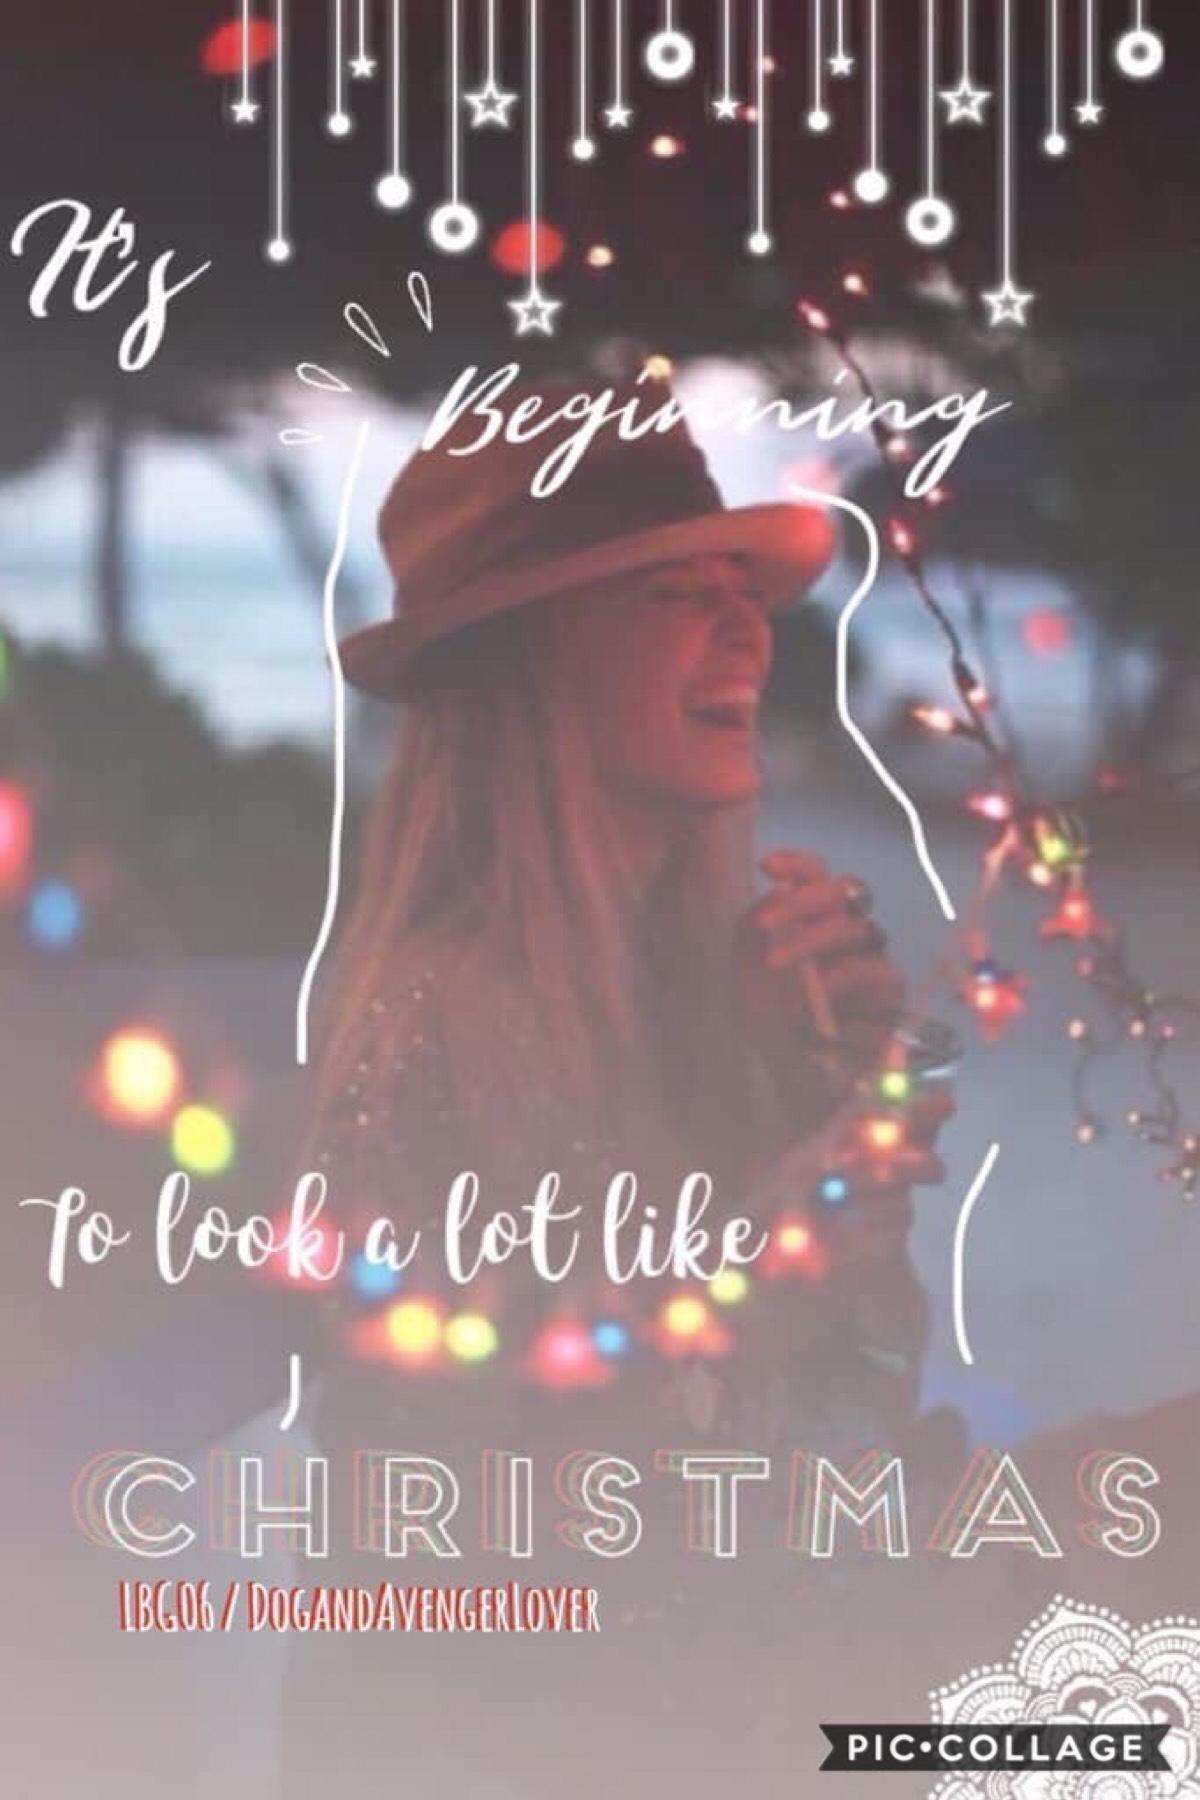 Collab with………Tap
LBG06!! She did the quote and beautiful background and I did the text and pngs! Go give her a follow! Merry Christmas! 🎄 